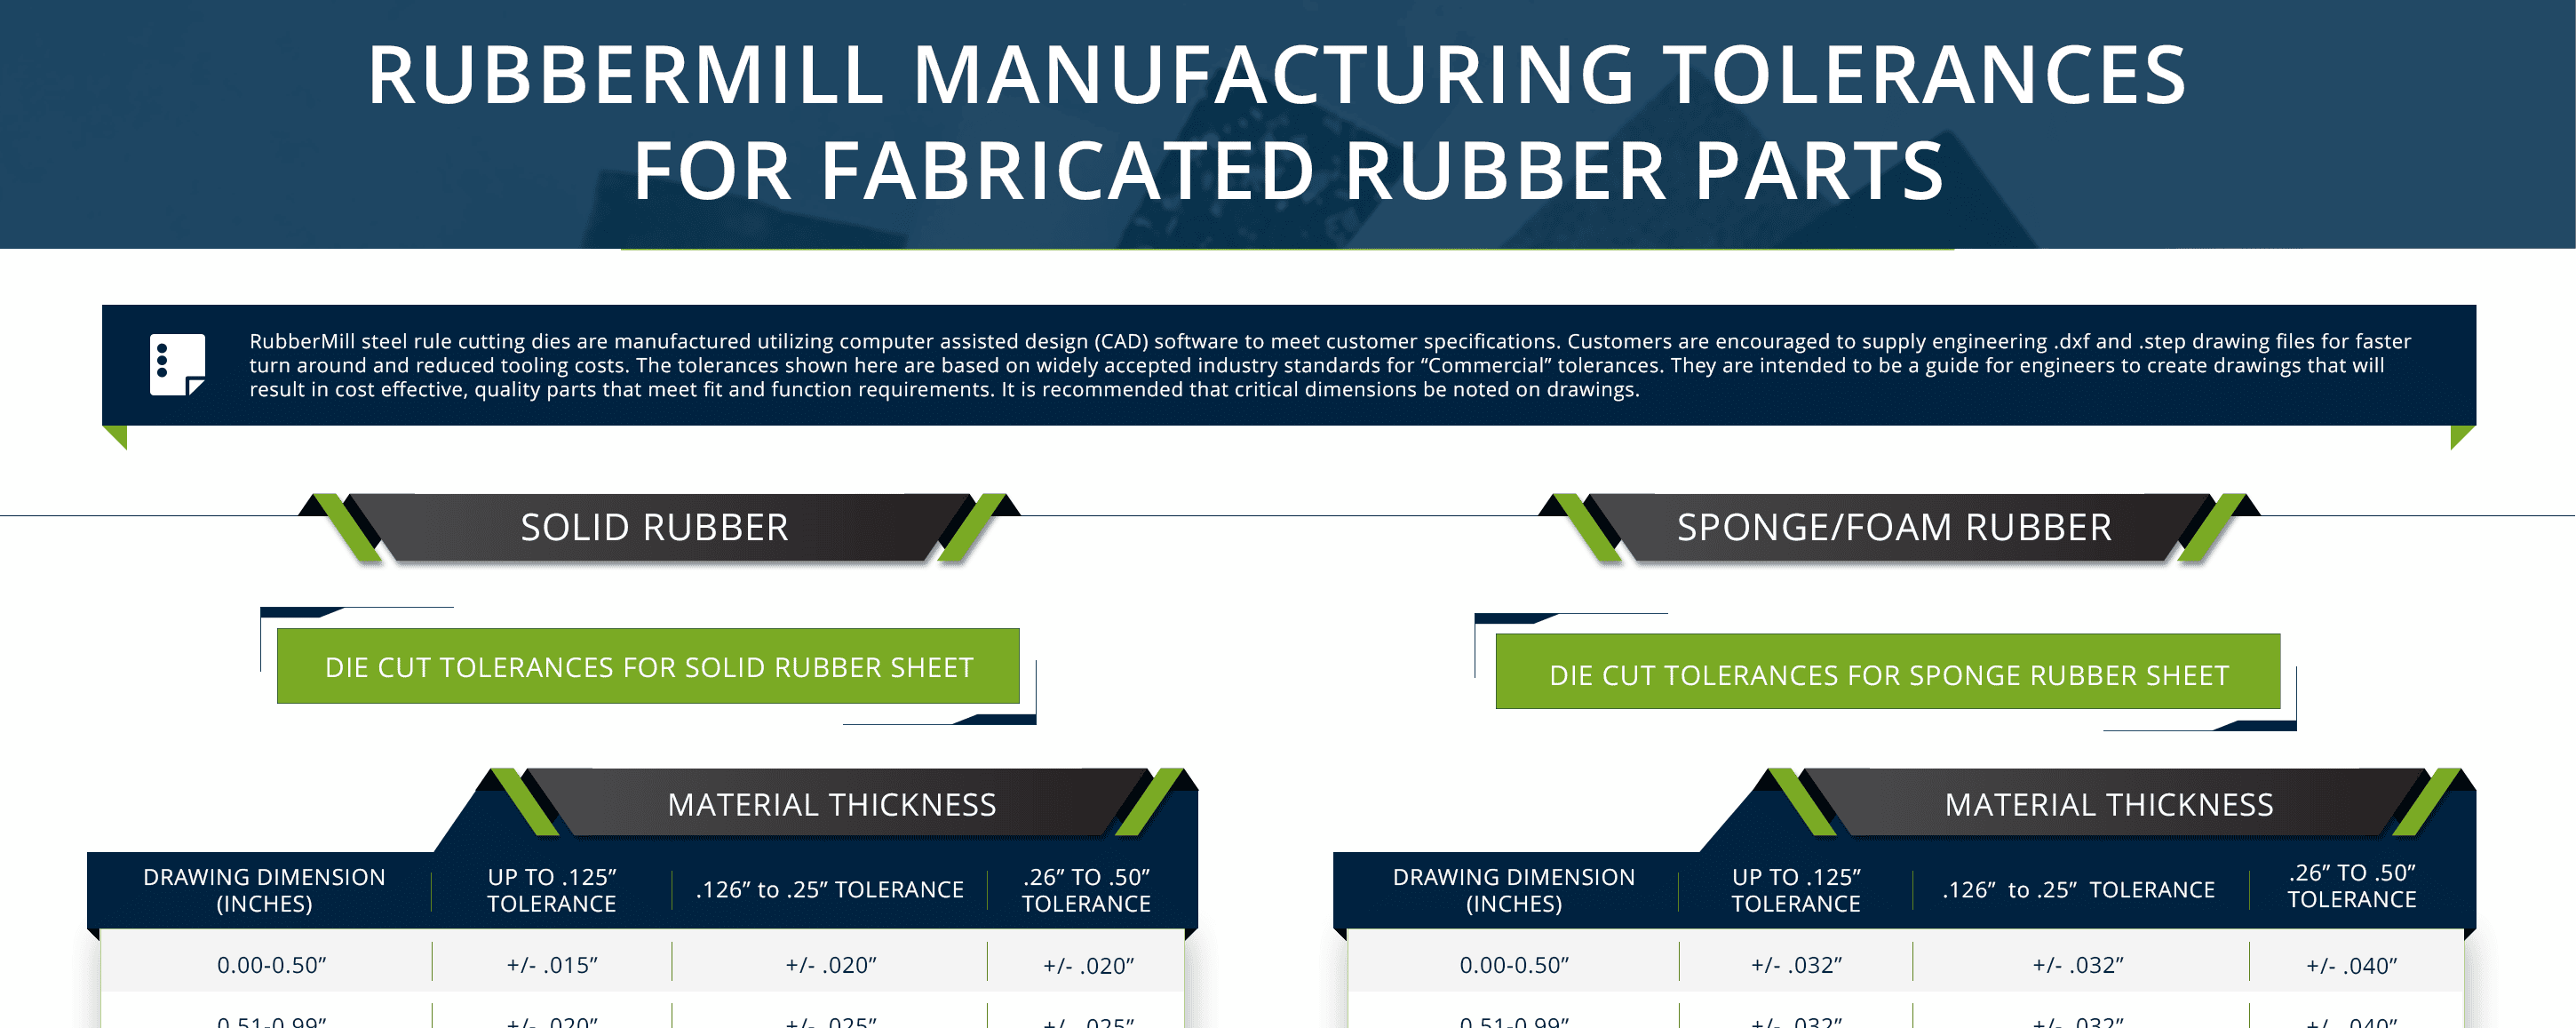 Rubbermill Manufacturing Tolerances For Fabricated Rubber Parts